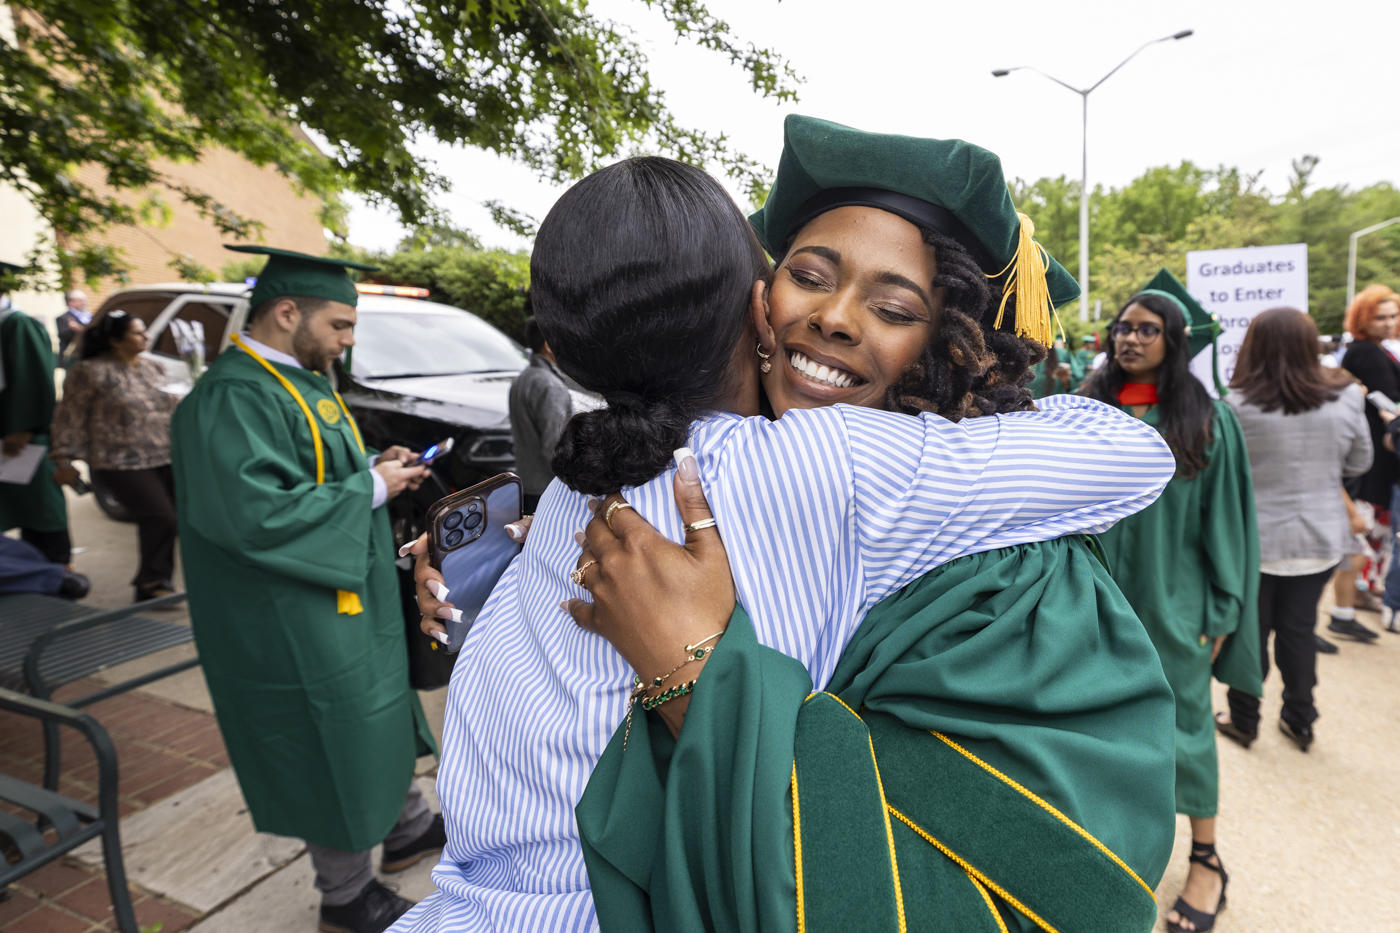 Graduate embraces a loved one outside after the ceremony